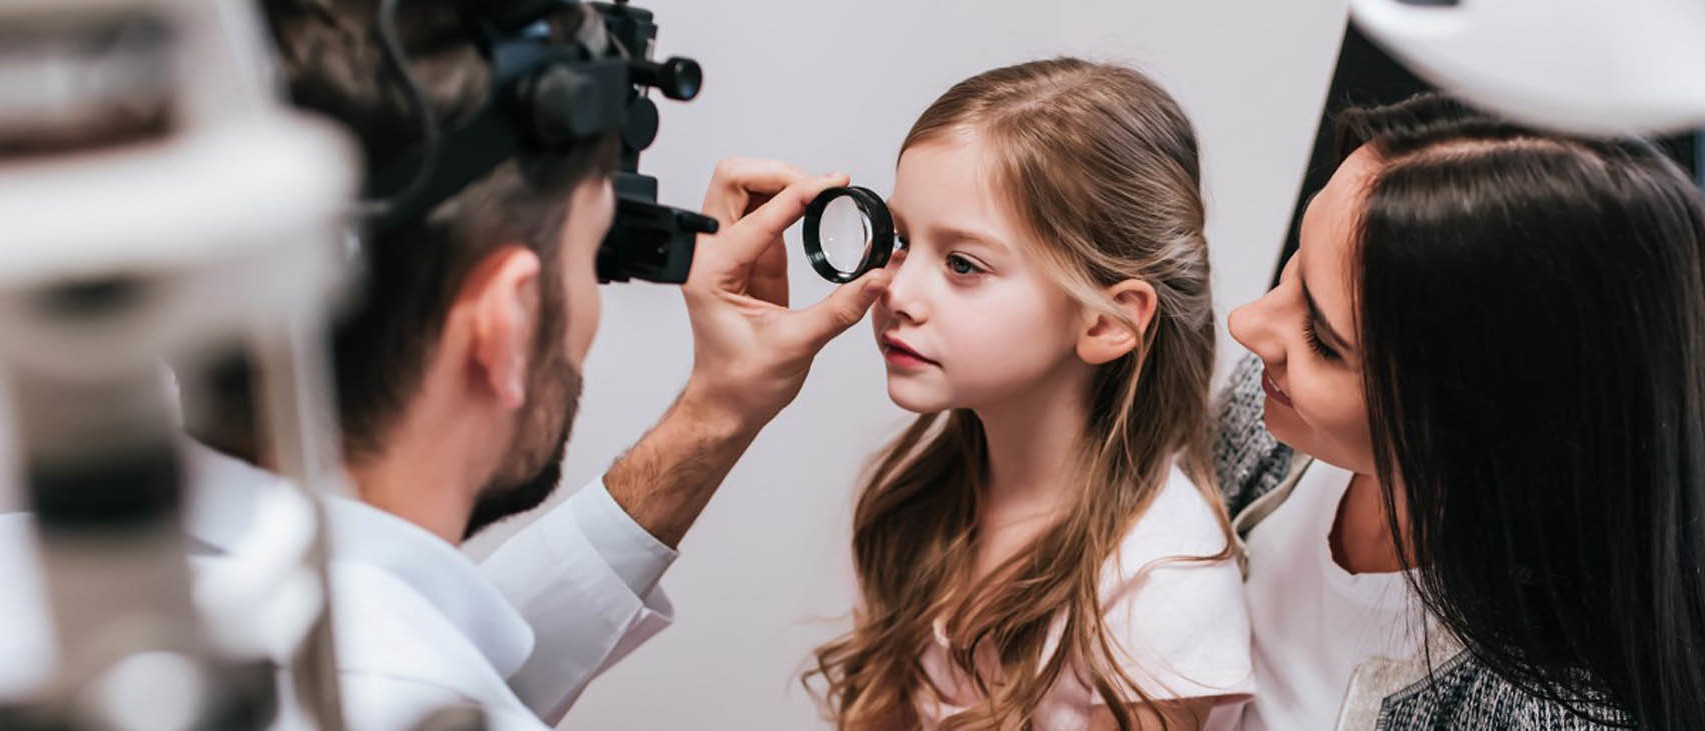 A young girl is receiving eye care from an optometrist.